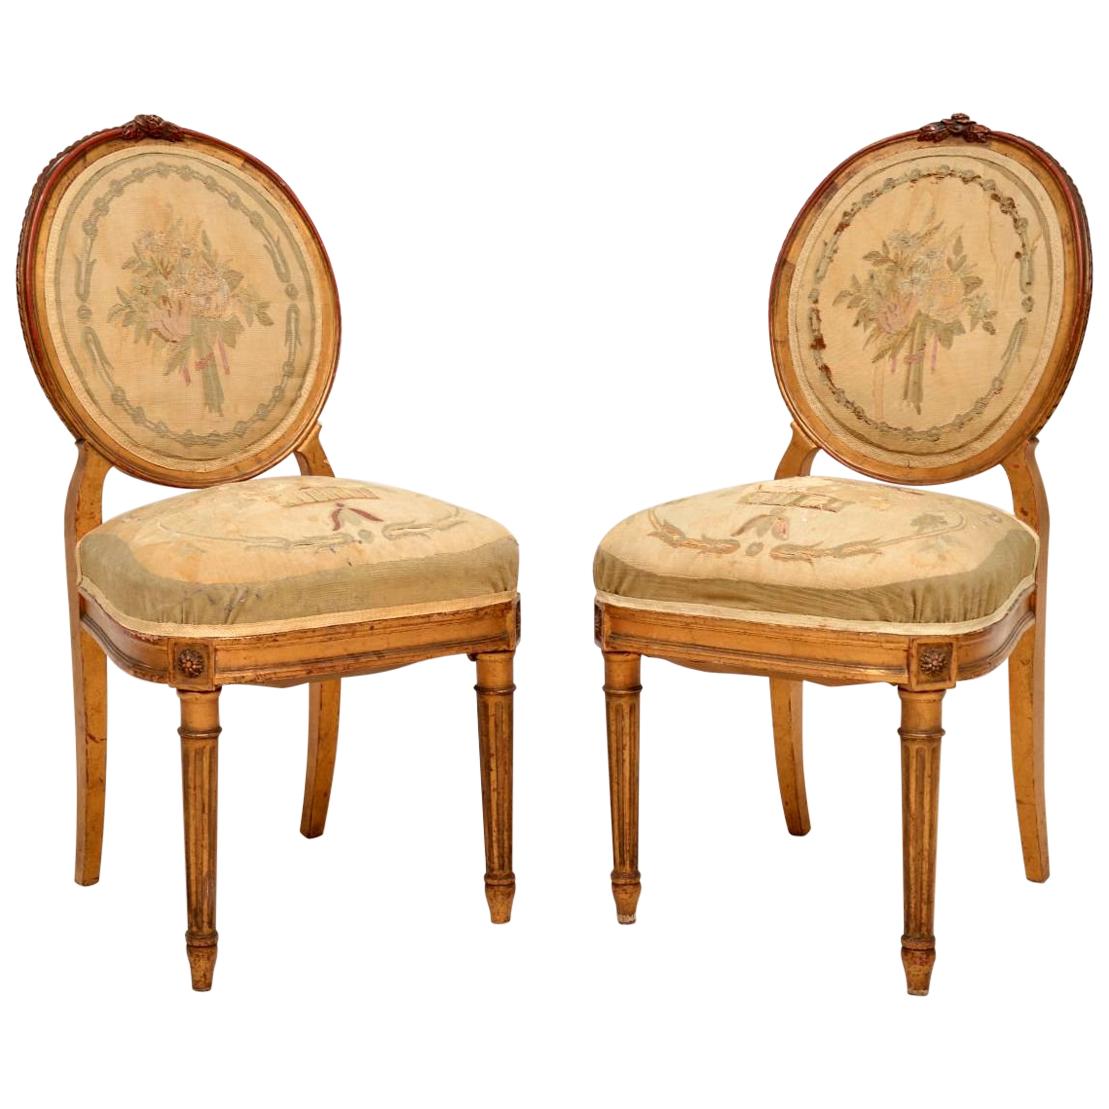 Pair of Antique French Giltwood Salon Side Chairs